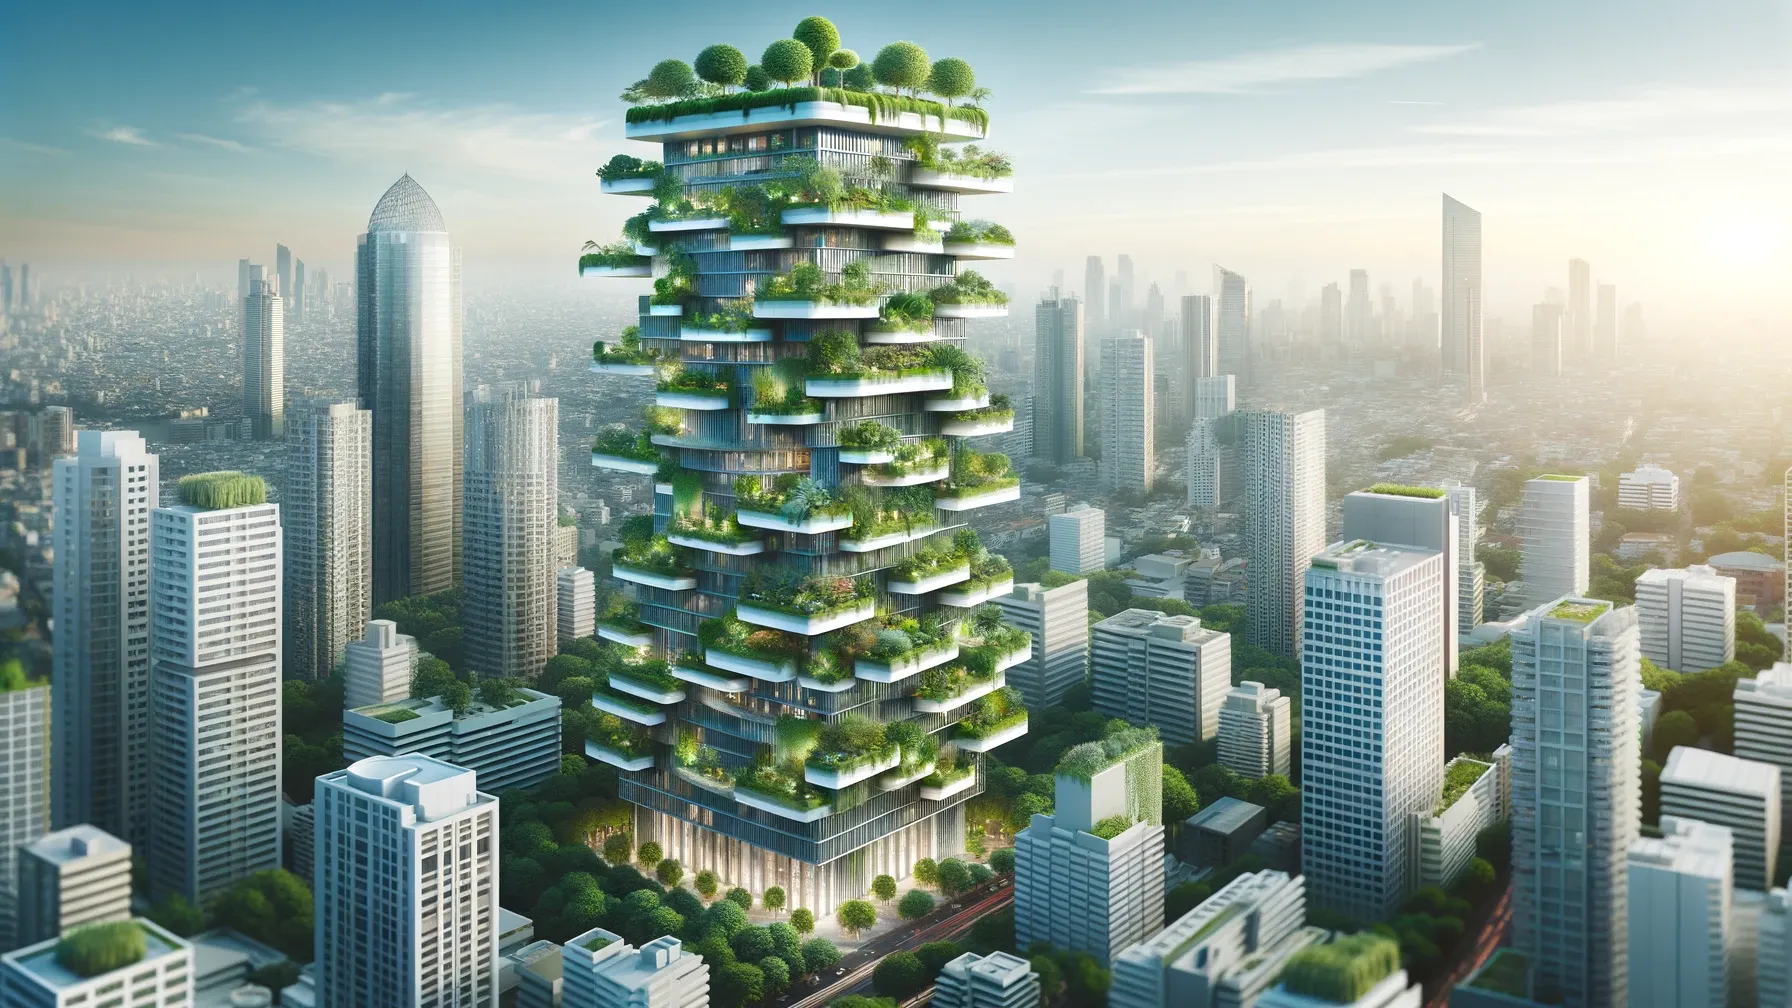 An urban skyscraper incorporating lush greenery throughout its structure